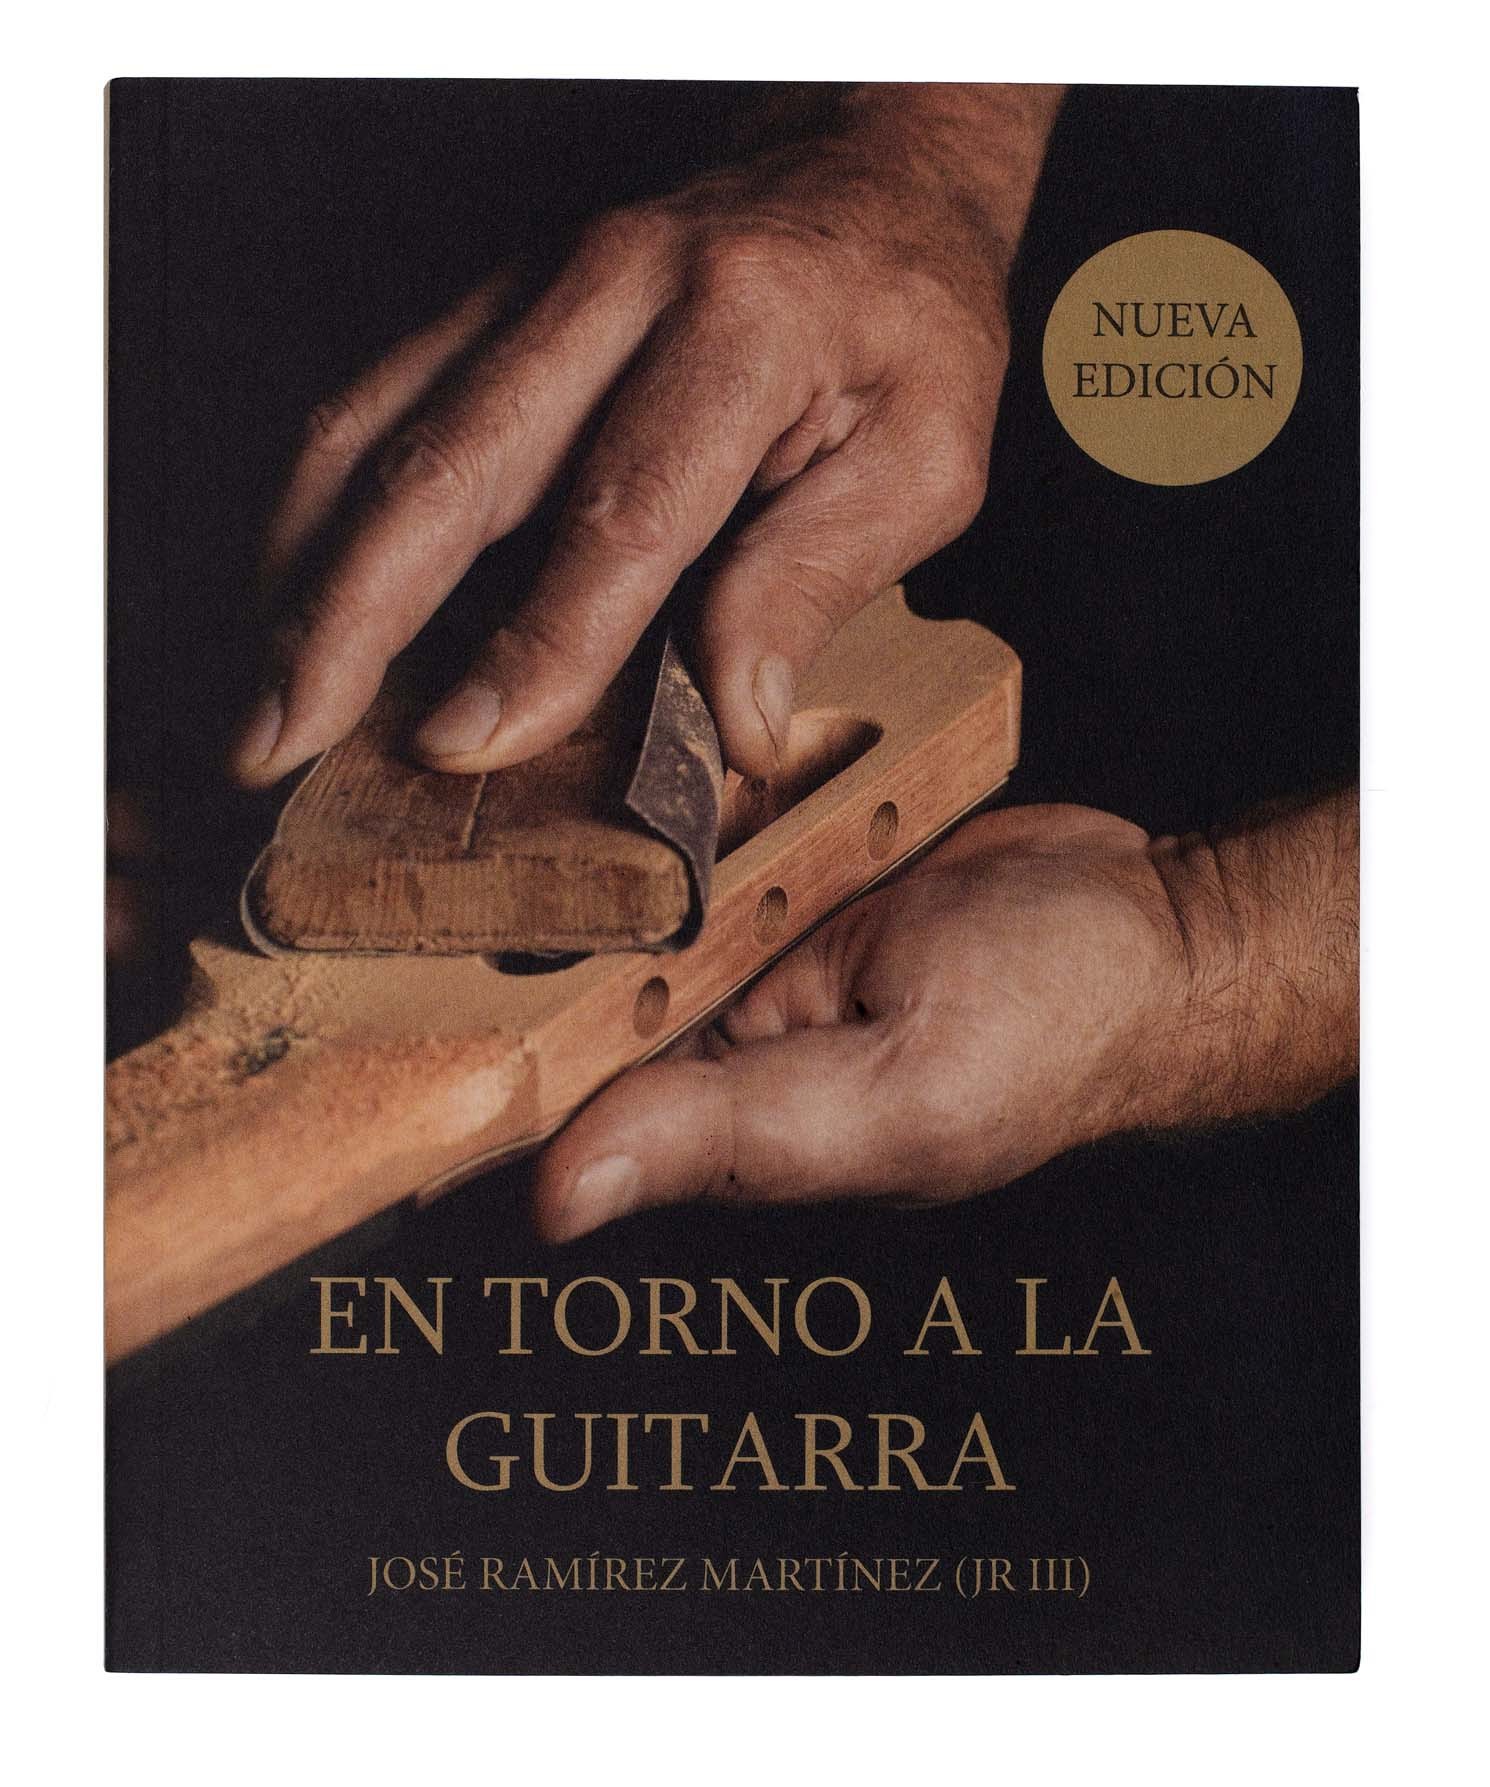 BOOK ABOUT THE GUITAR